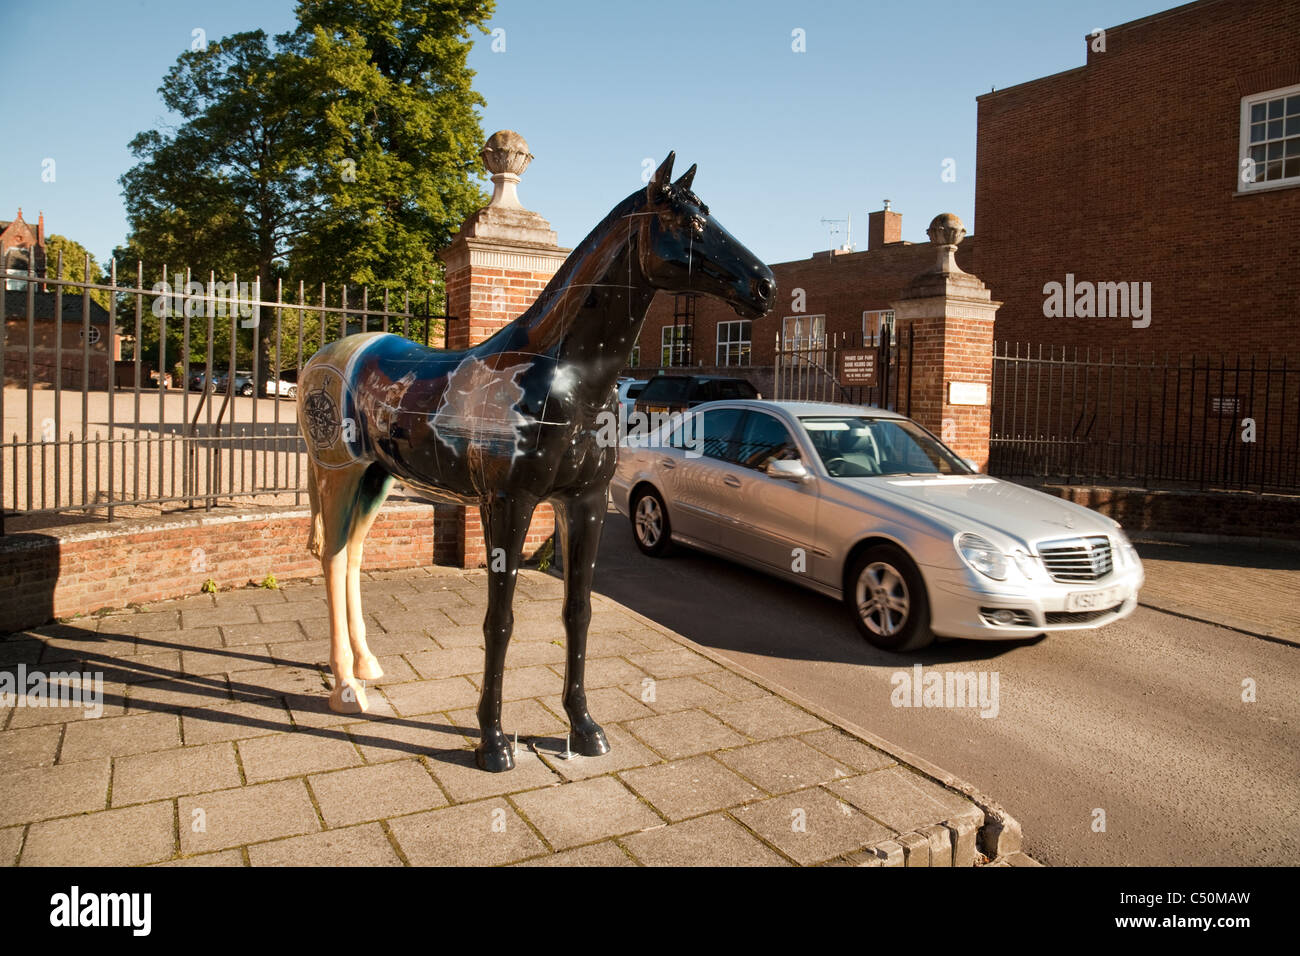 Painted horse outside the entrance to the Jockey club, Newmarket town, Suffolk UK Stock Photo